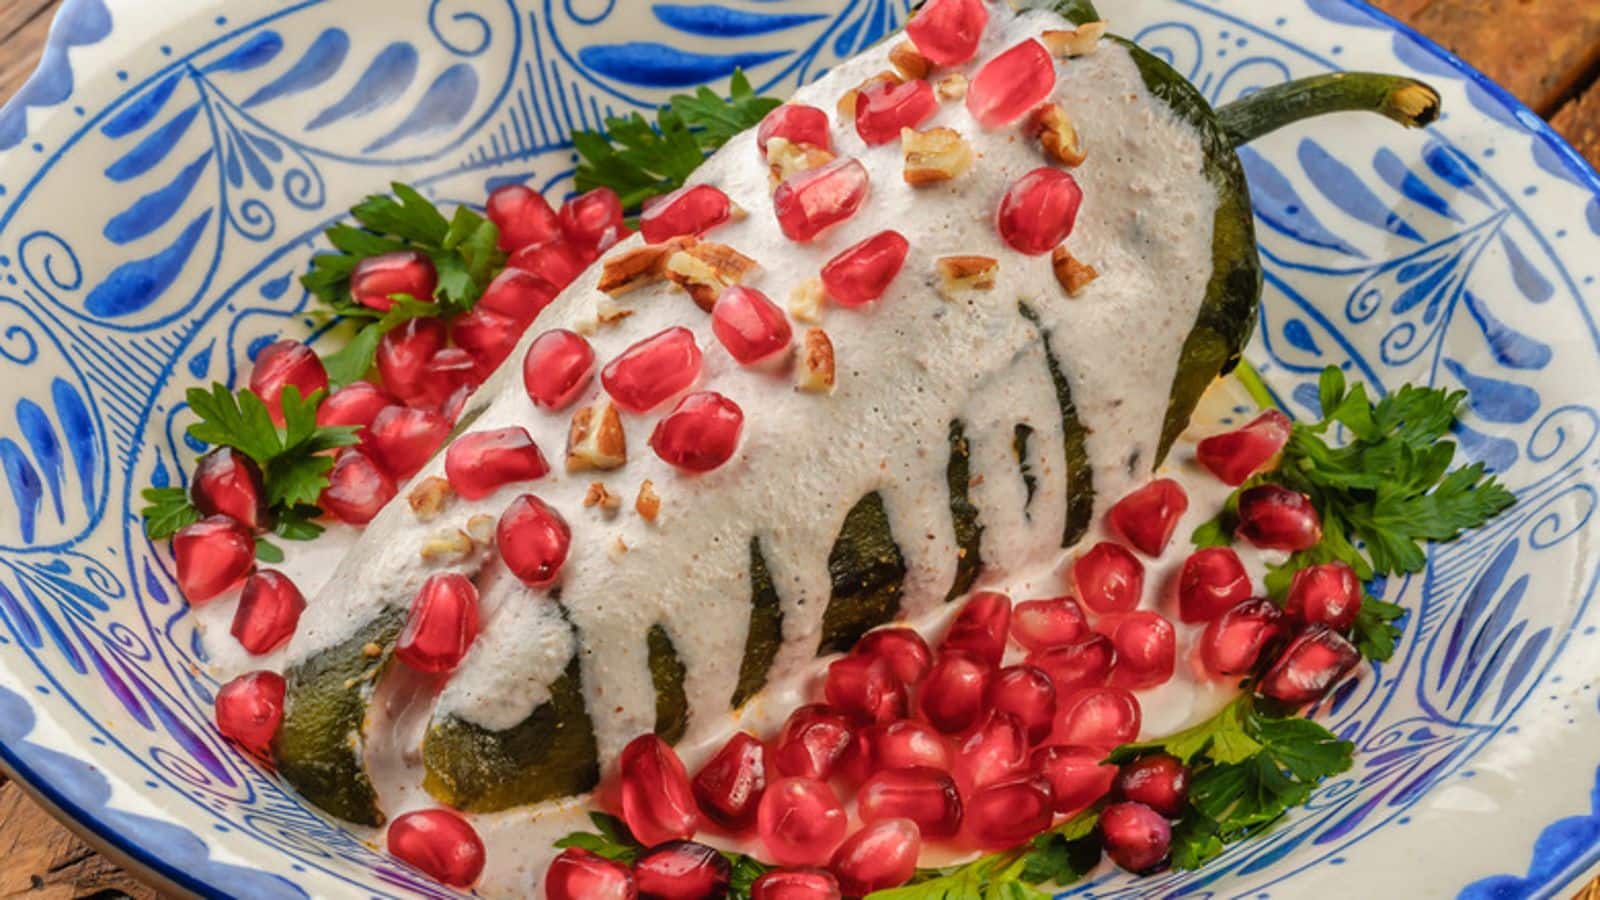 Recipe-o'-clock: It's the traditional Mexican chiles on the menu